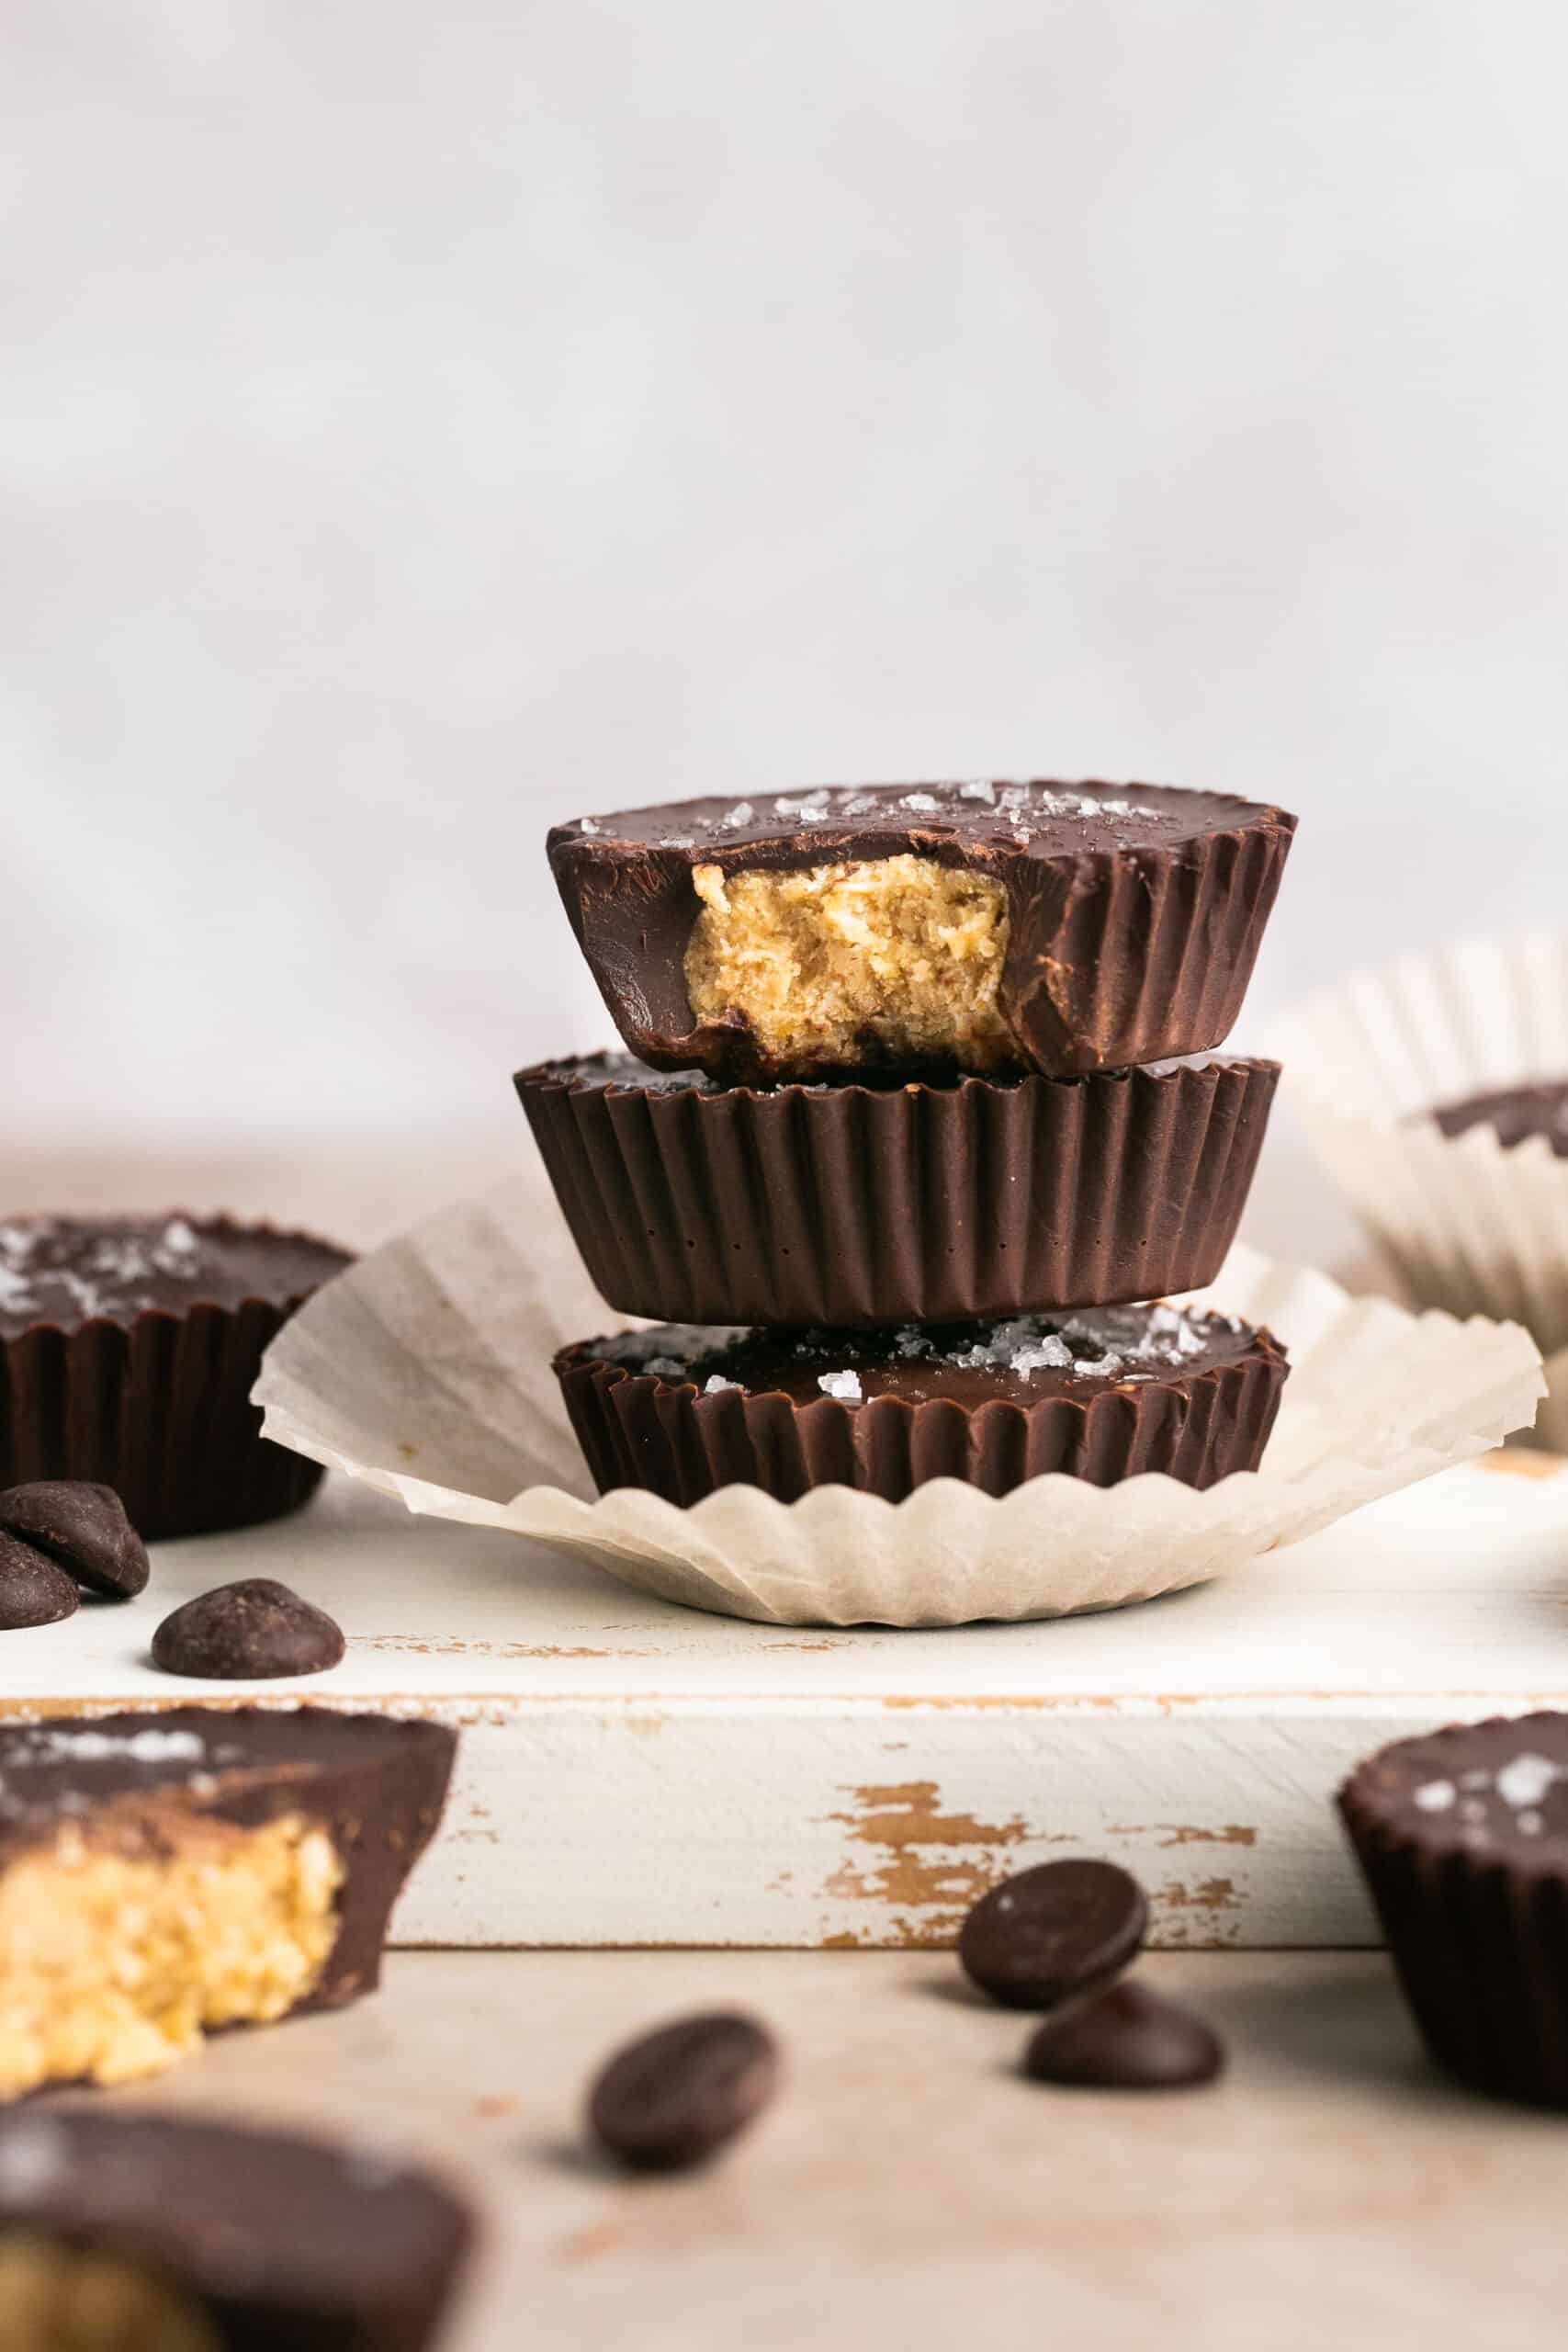 Reese's Peanut Butter Cups White Chocolate 24 x 40g